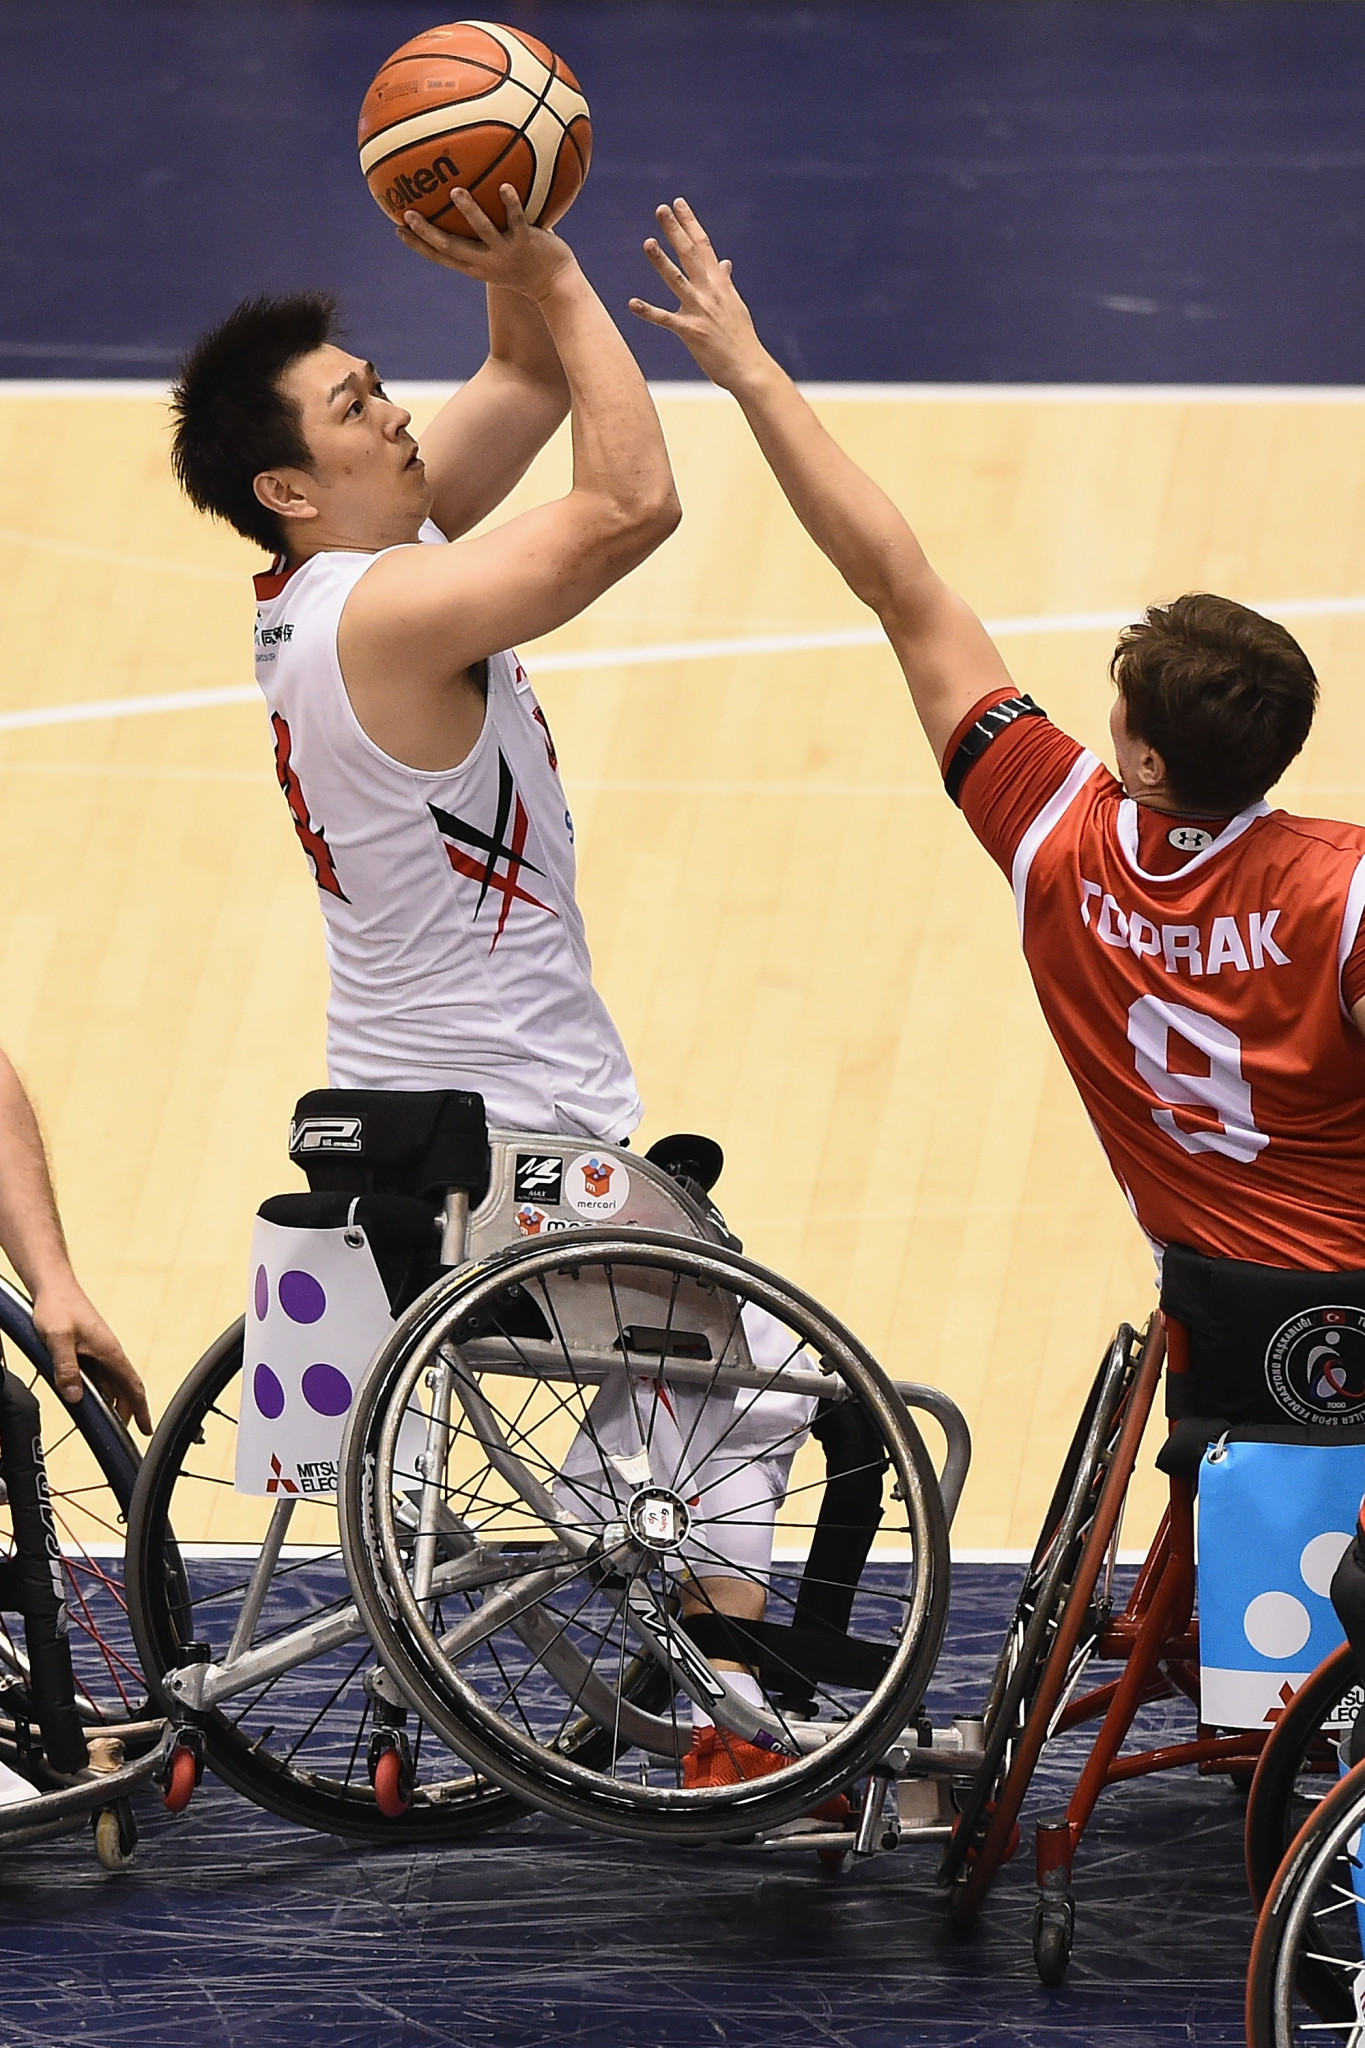 Japan will compete in both the men's and women's events at Jakarta 2018 ©Getty Images